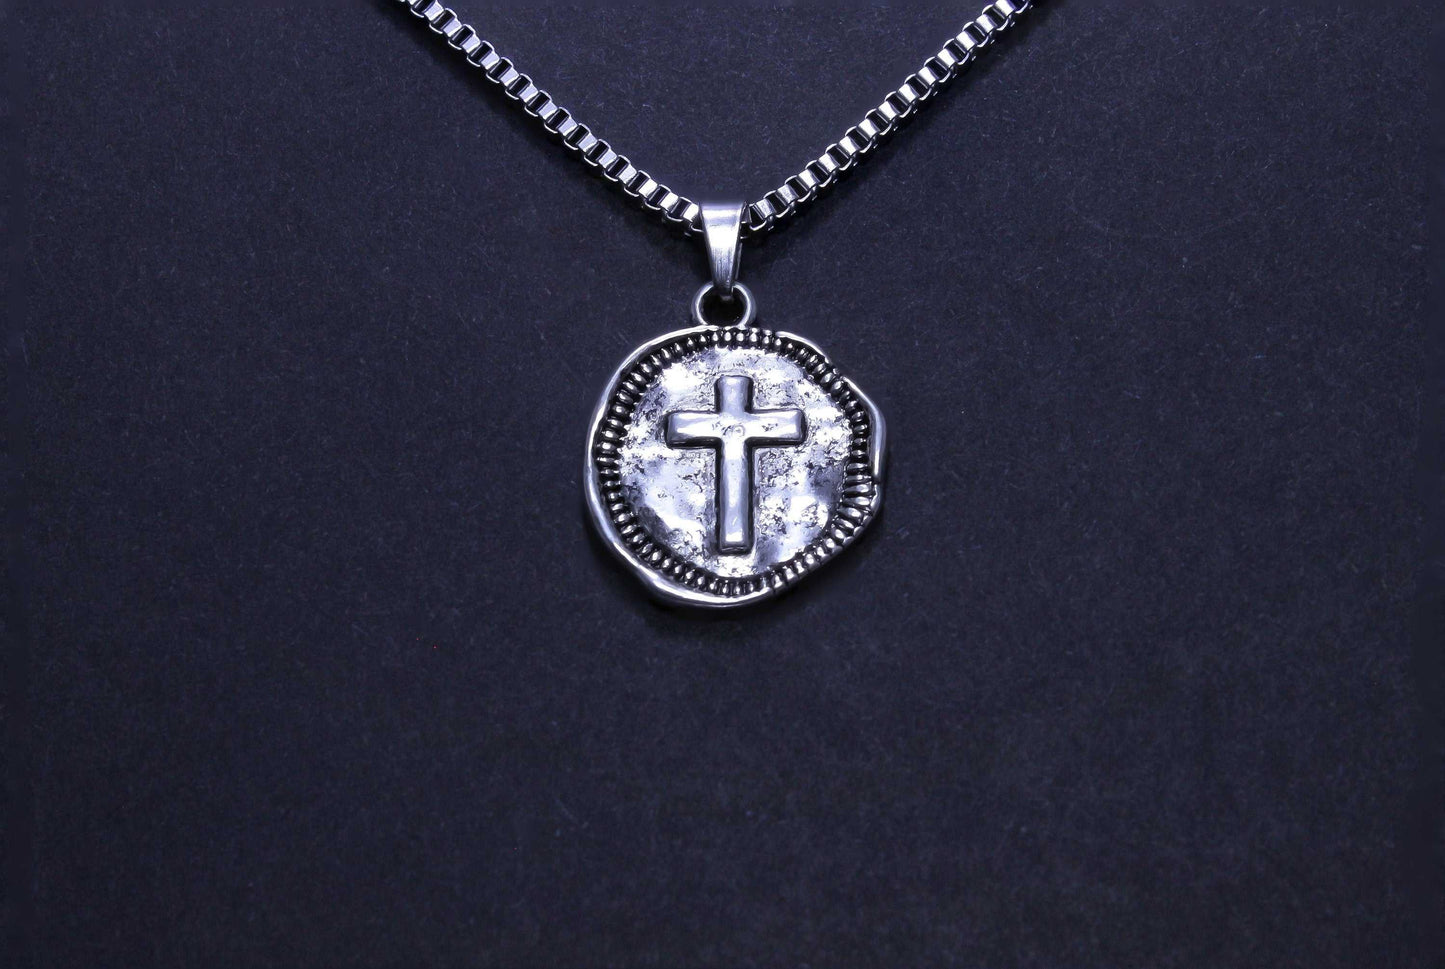 CROSS COIN  NECKLACE - Necklace Stylish Silver Necklace - Necklaces for Women - Necklace for Men - Link Necklace